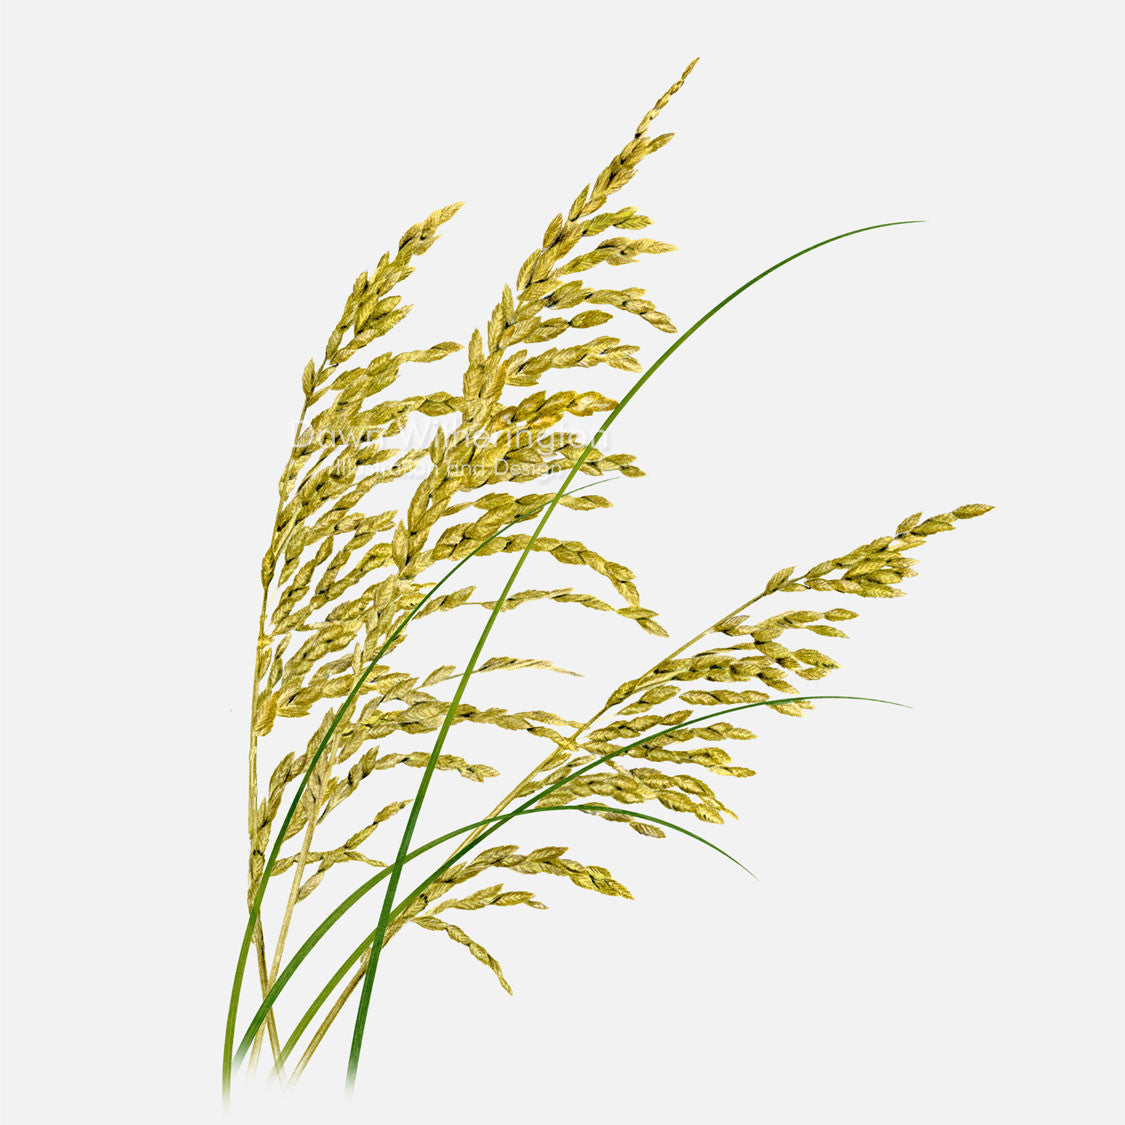 This beautiful illustration of seaoats, Uniola paniculata, is botanically accurate in detail.